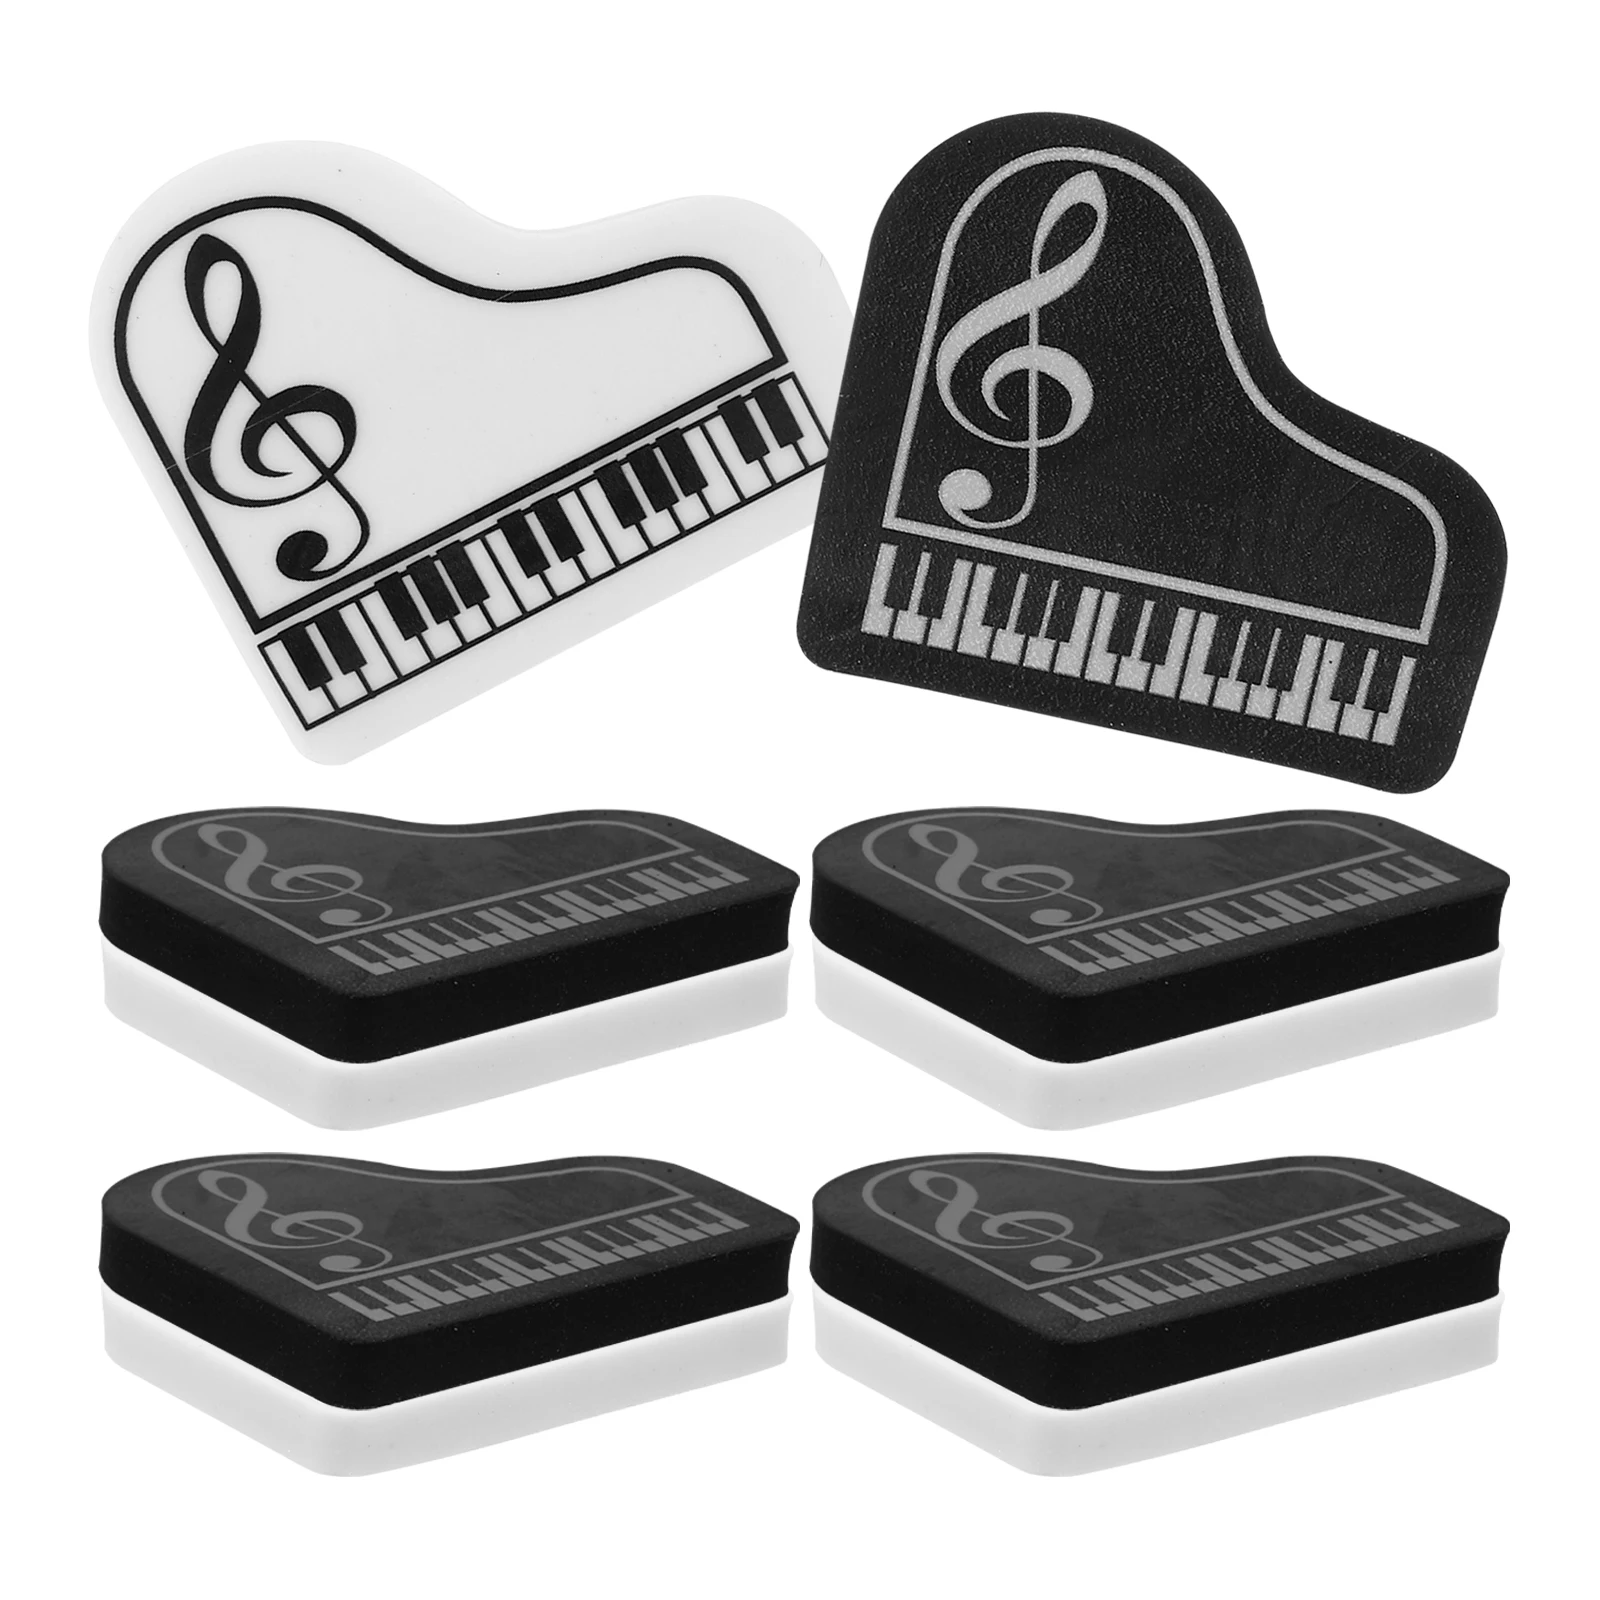 

10Pcs Cute Kawaii Pencil Cartoon Musical Note Piano Rubber Eraser Kids School Office Stationery Supply Lovely Piano Erasers